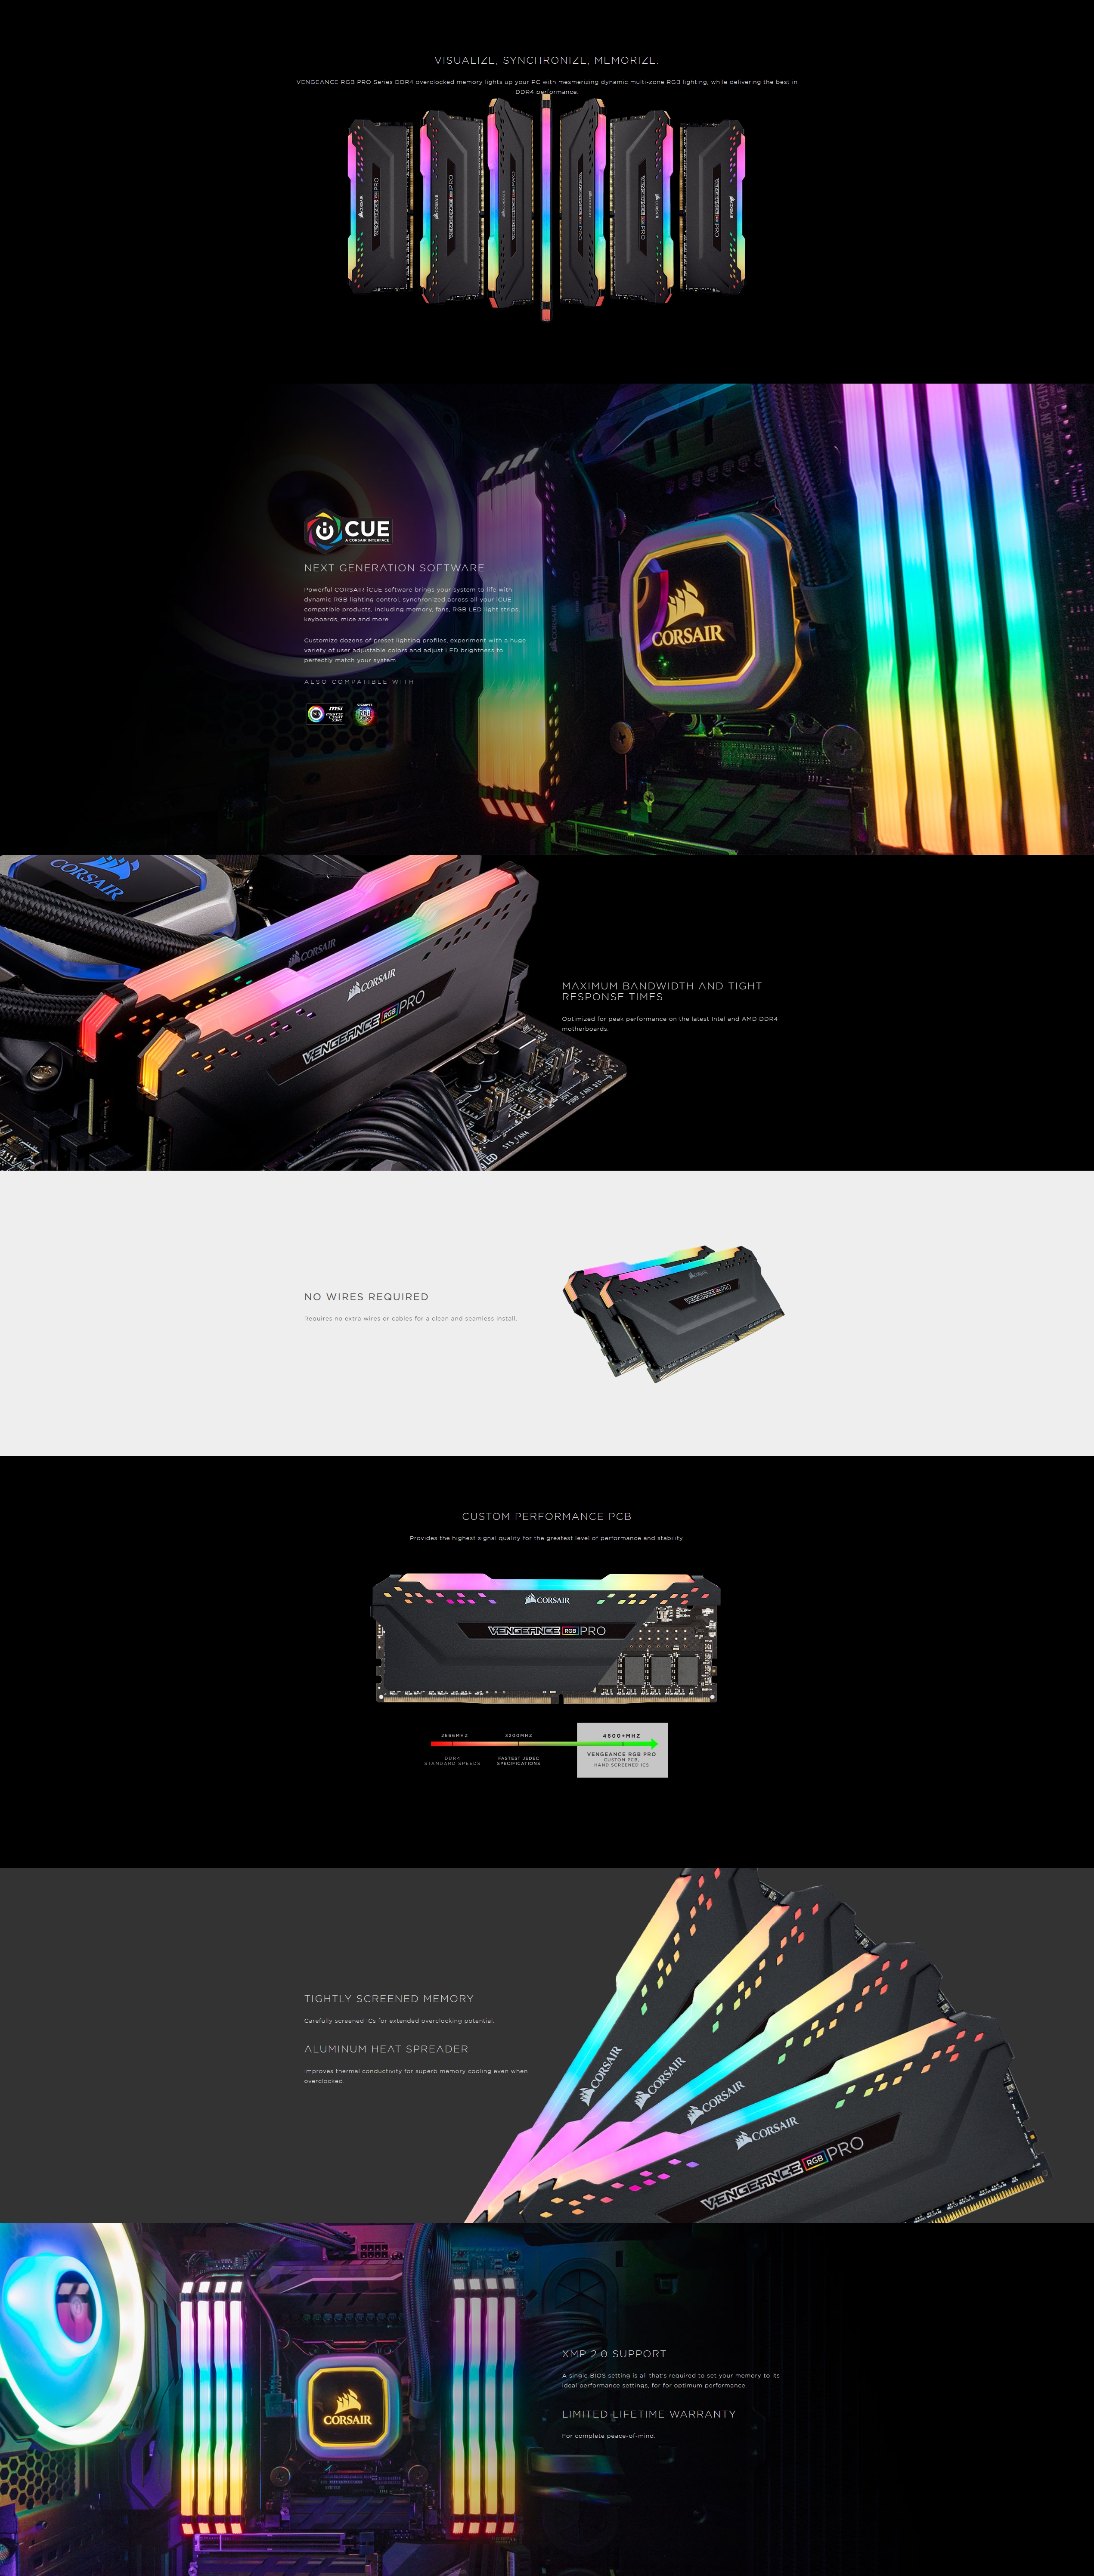 A large marketing image providing additional information about the product Corsair 32GB Kit (2x16GB) DDR4 Vengeance RGB Pro C16 2666MHz - Black - Additional alt info not provided